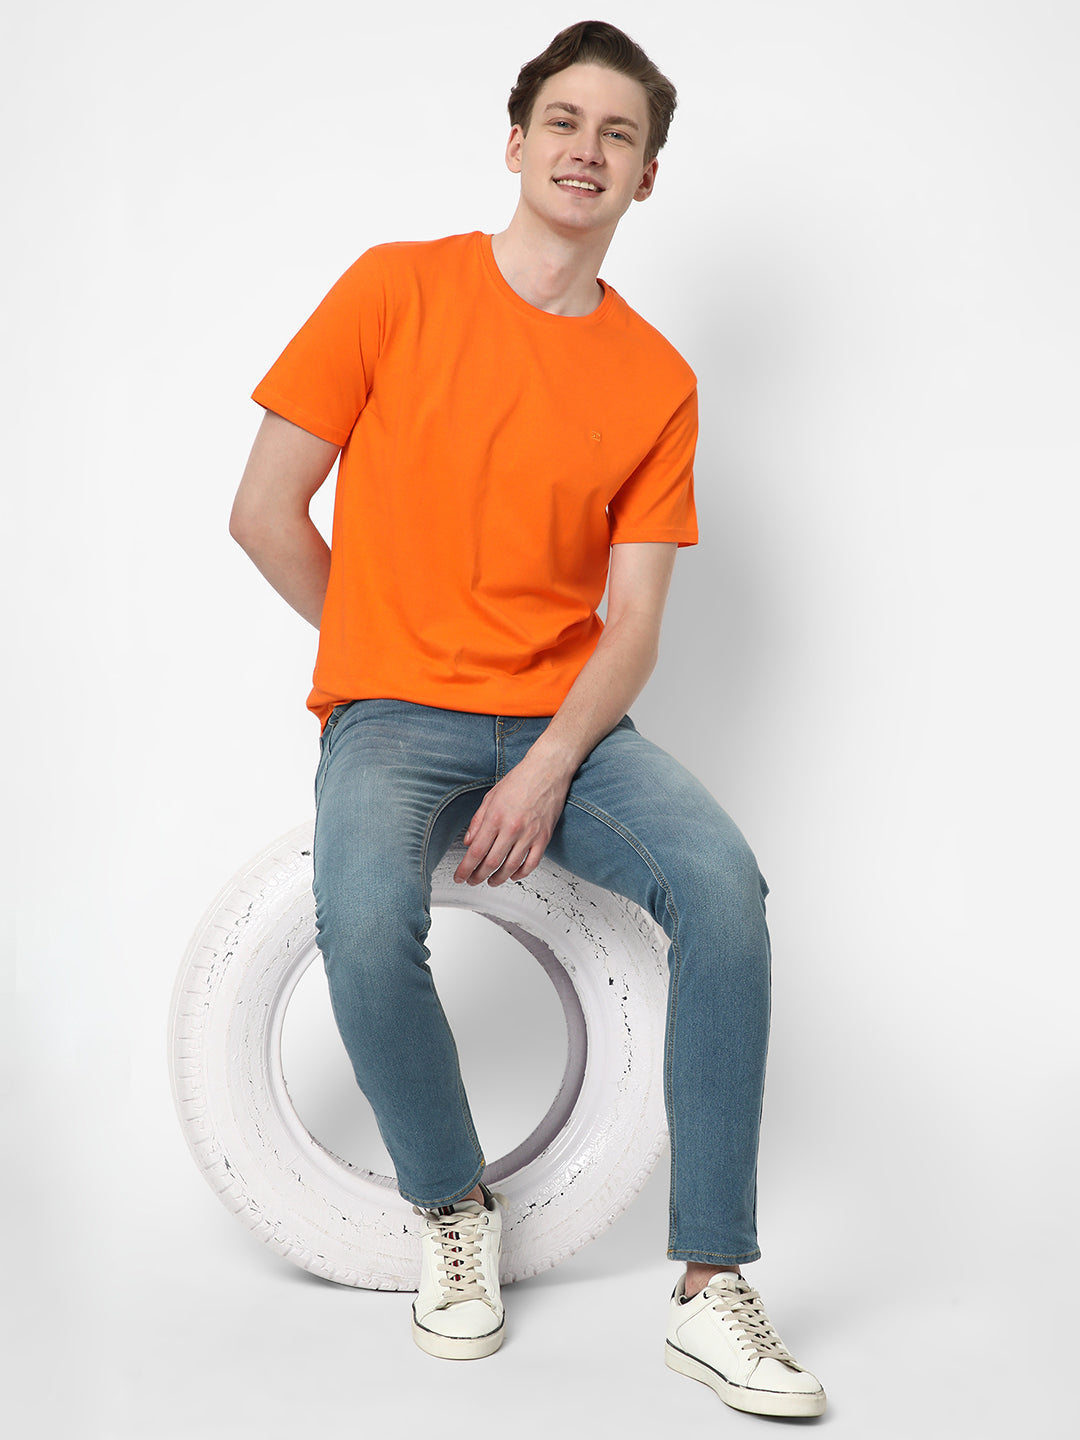 Cotstyle Cotton Fabrics Round Neck Short Length Plain Half Sleeve Casual & Daily Wear Men's T-Shirts -  Pack of 1 - Orange